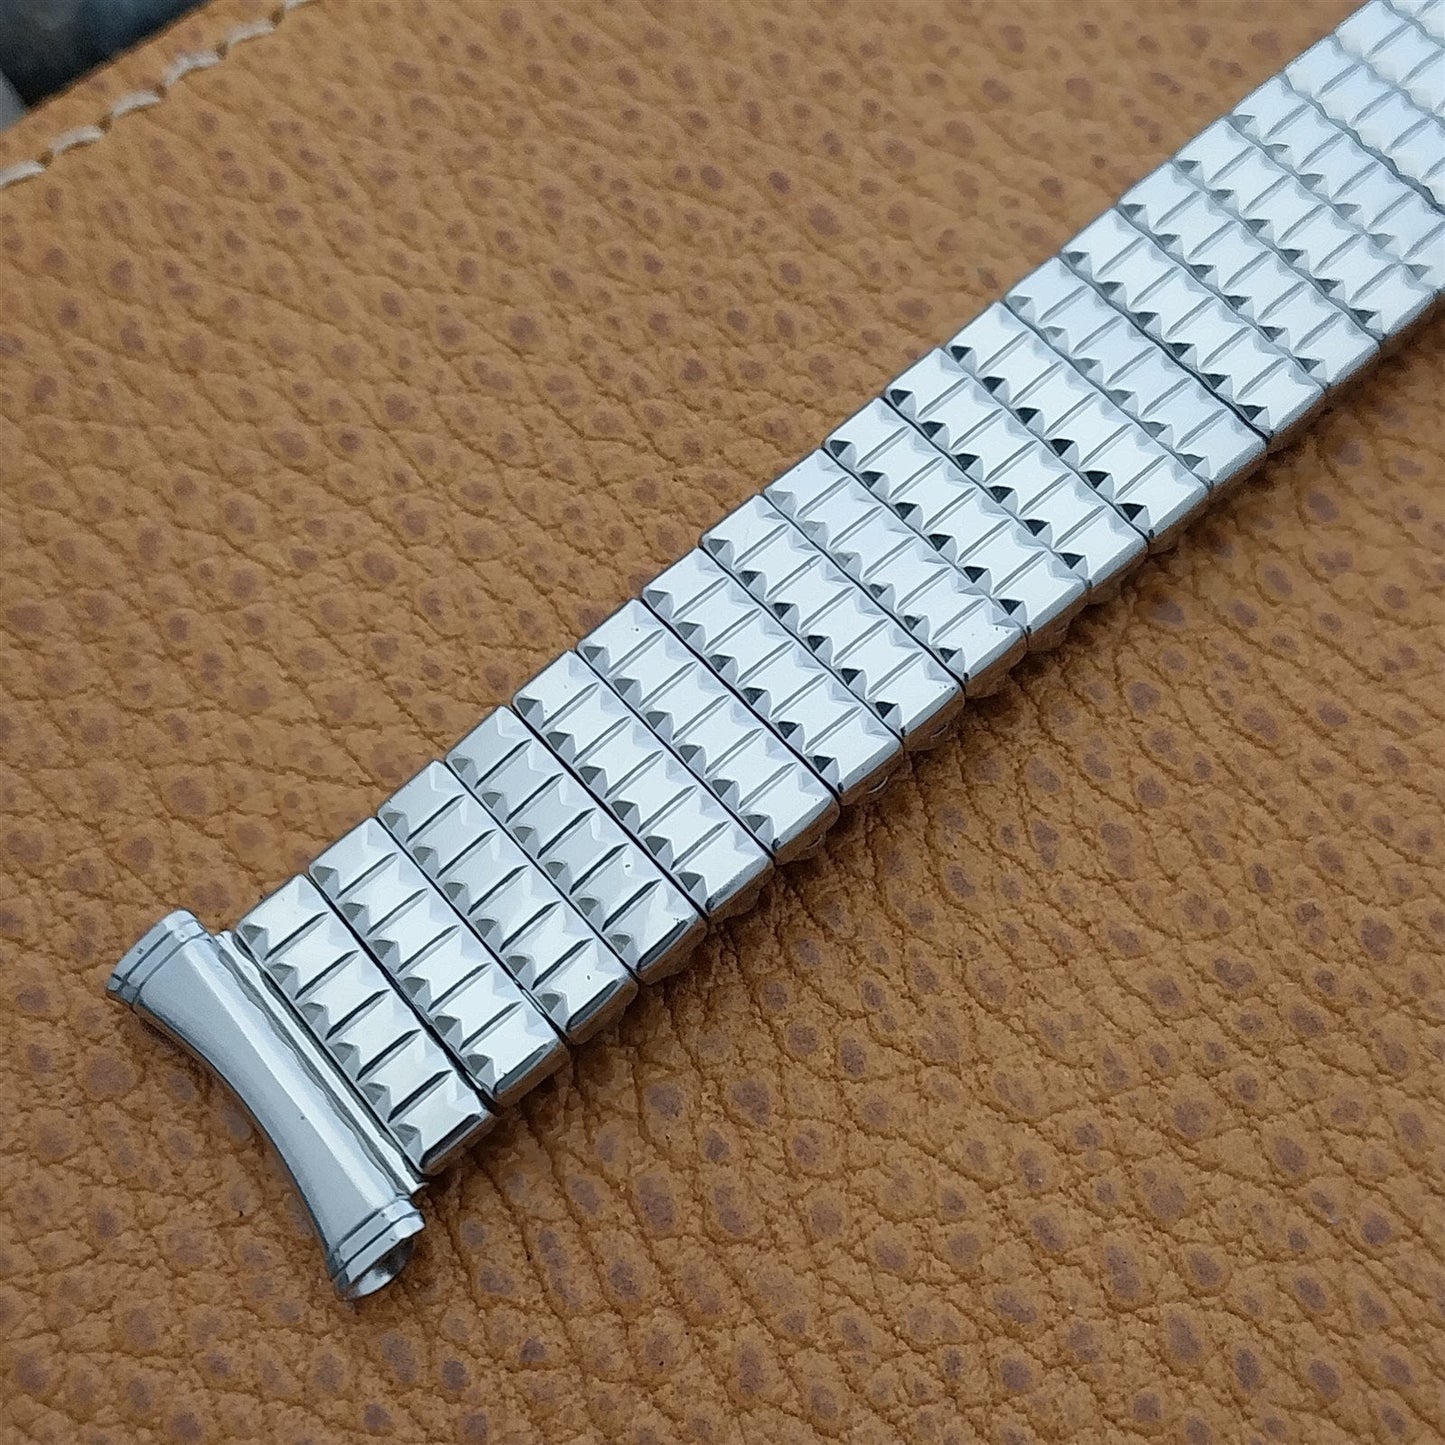 19mm 18mm 17mm 16mm Gemex Stainless Steel Expansion mcm 1960s Vintage Watch Band